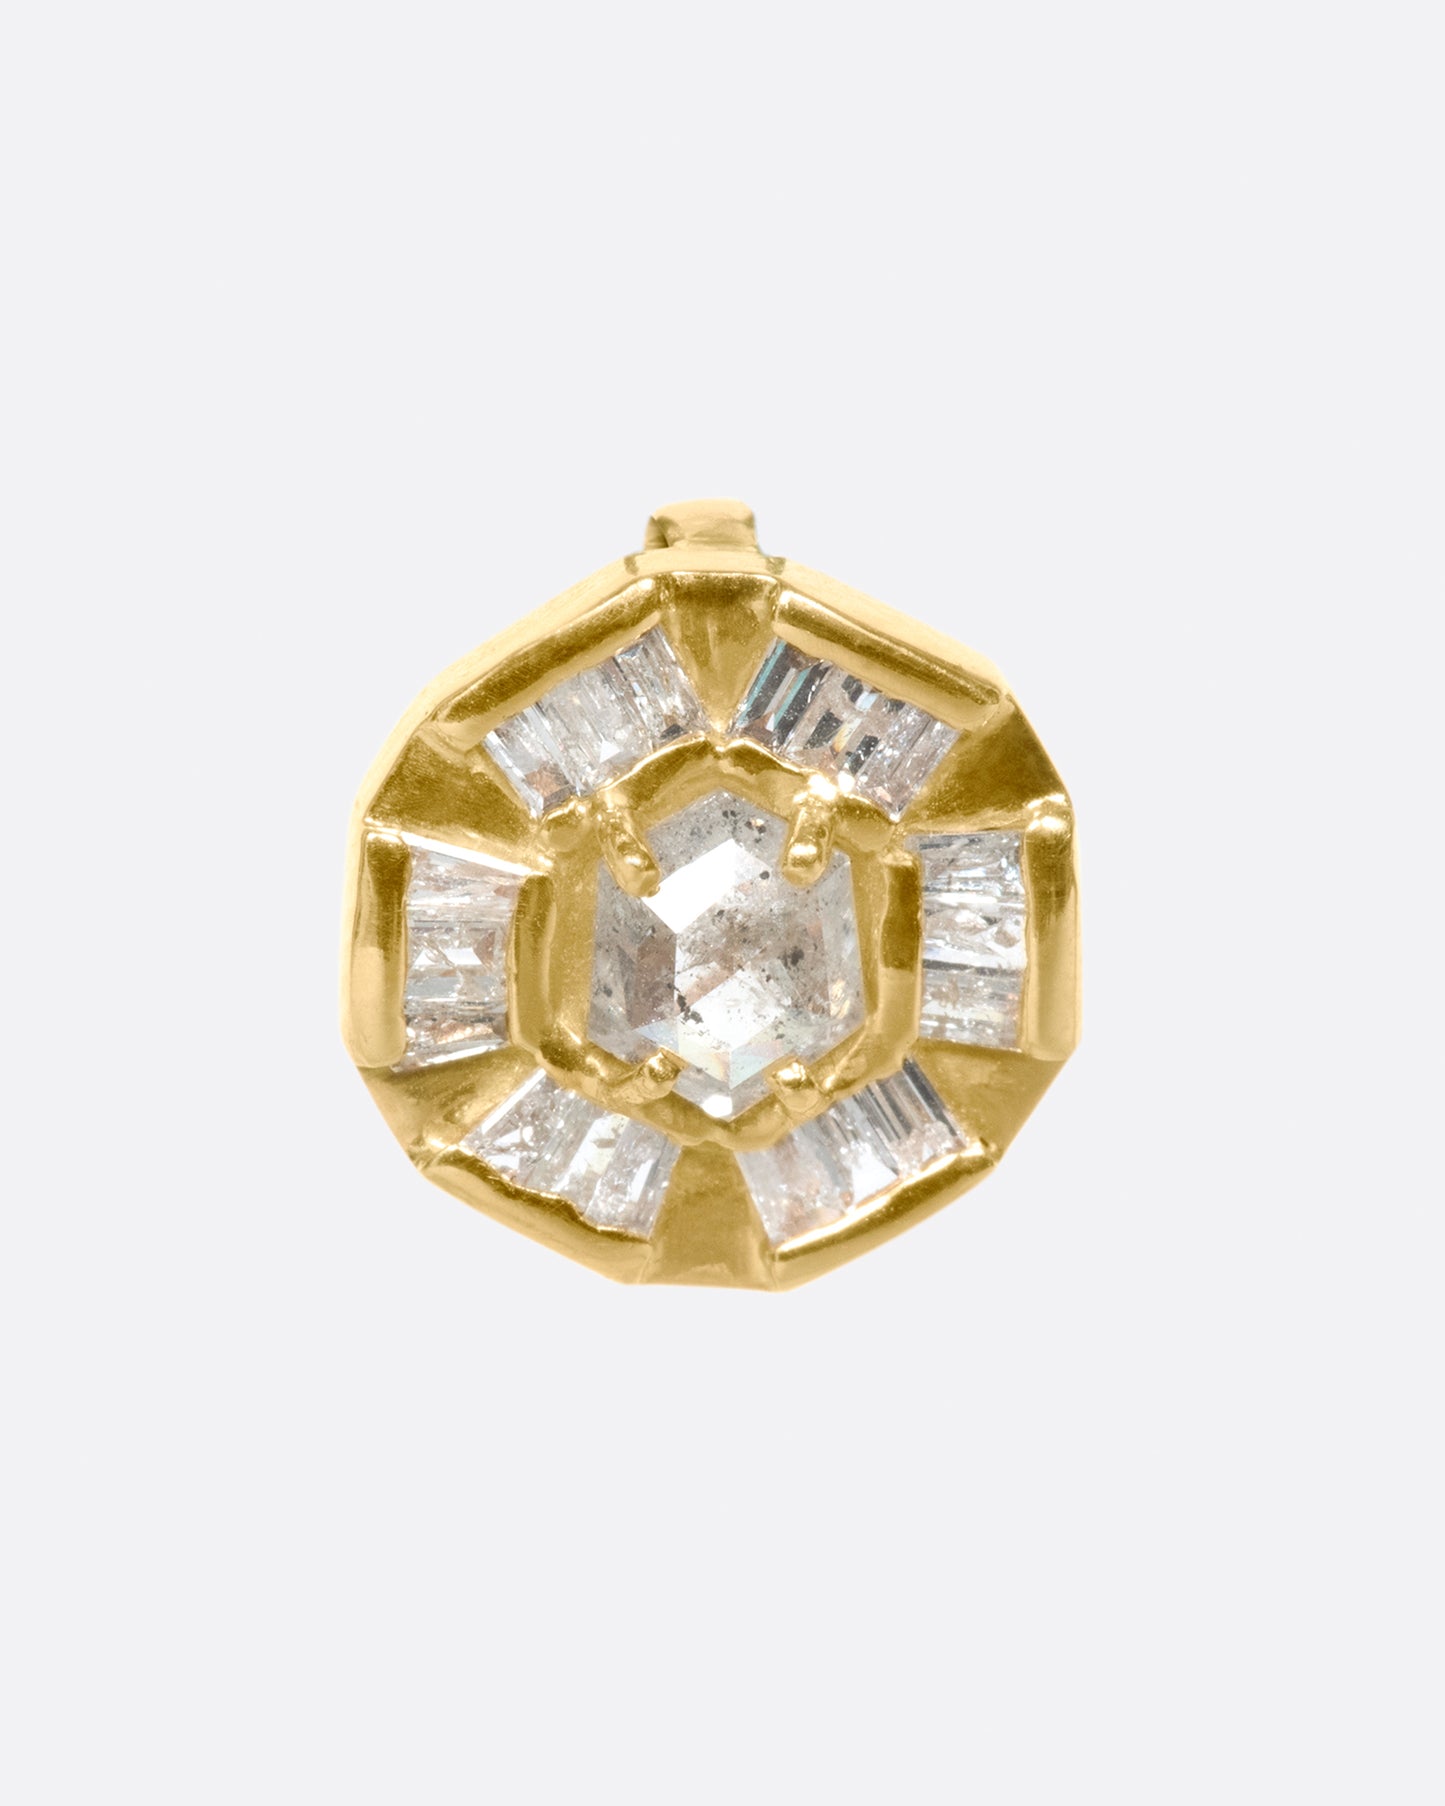 An alternative to a classic medal, this round pendant has a rose cut diamond at its center and is lined with baguettes.